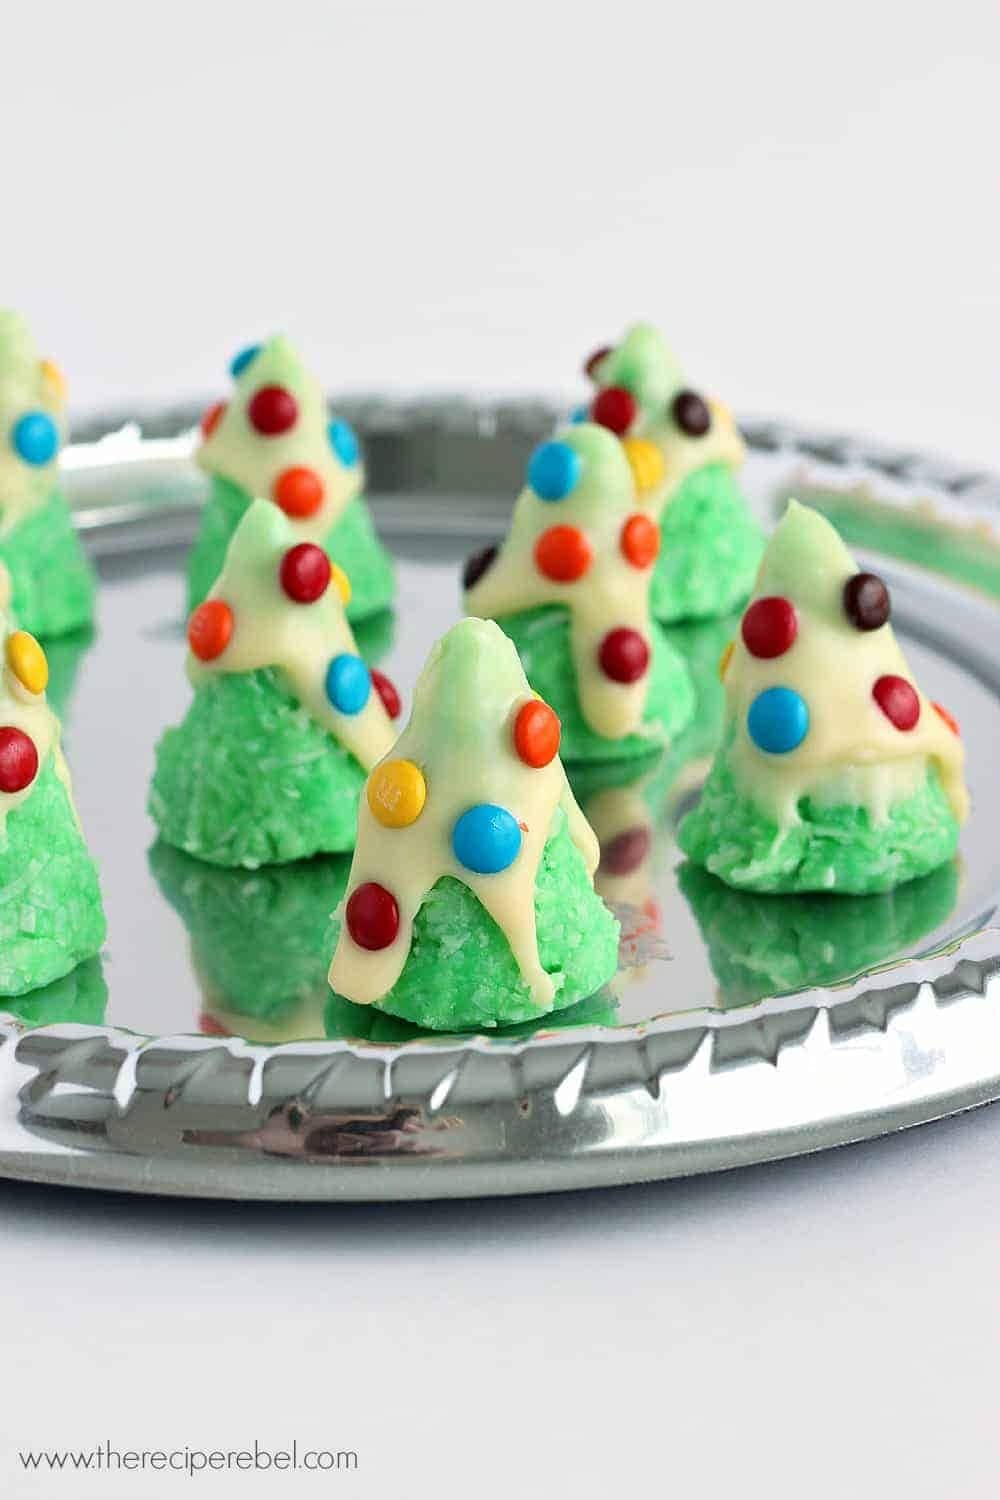 Green dough shaped in Christmas tree dipped on white chocolate decorated with M&M candies.